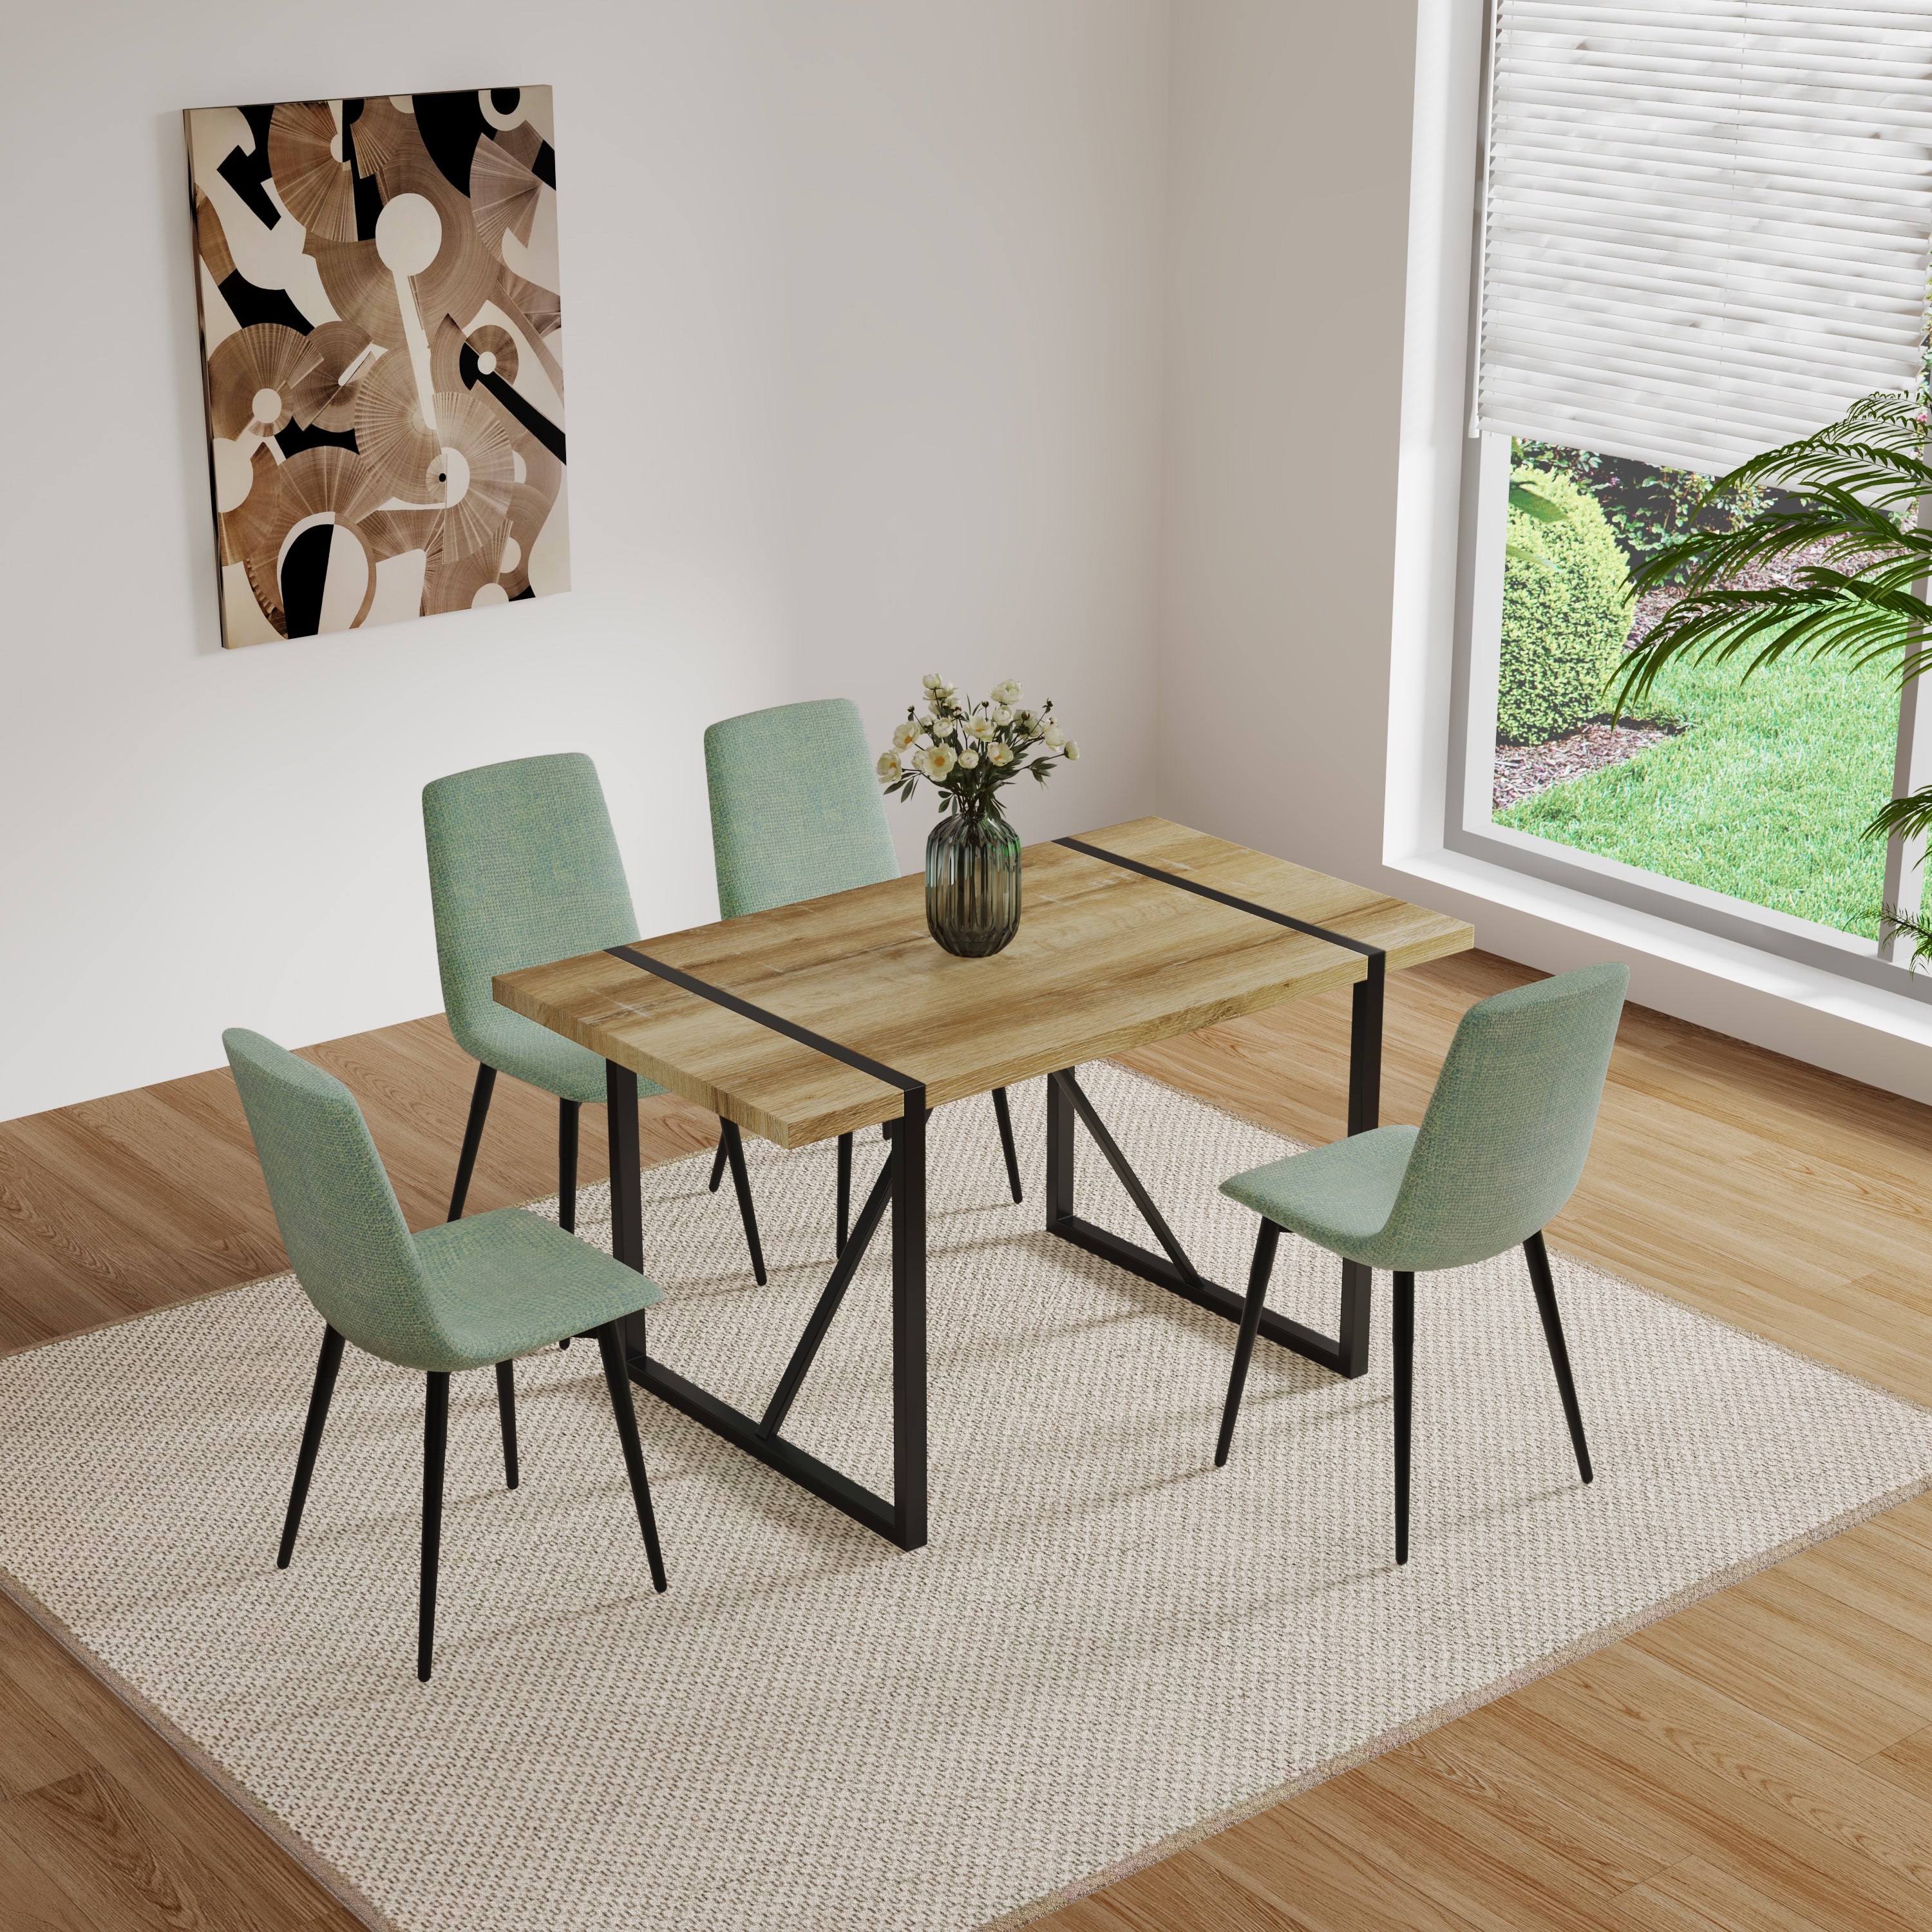 Dining Chairs Set of 4,Modern Kitchen Dining Room ChairSet of 4 Modern Kitchen Dining Room Chairs, Cushion Seat and Sturdy Black Metal Legs - Light Green